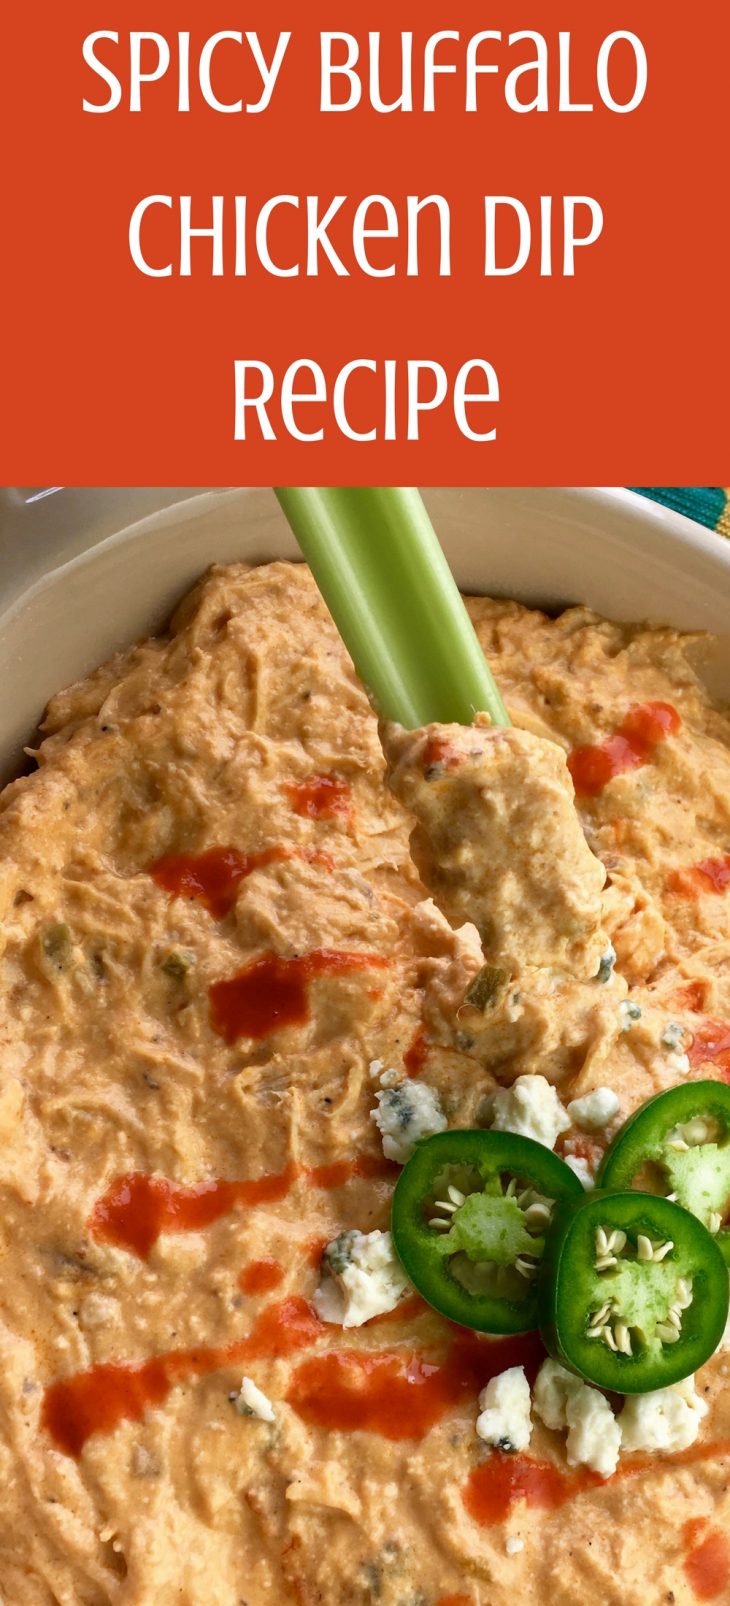 Make our easy Spicy Buffalo Chicken Dip recipe for your next event or party!  Grab this recipe and watch friends devour it in minutes!